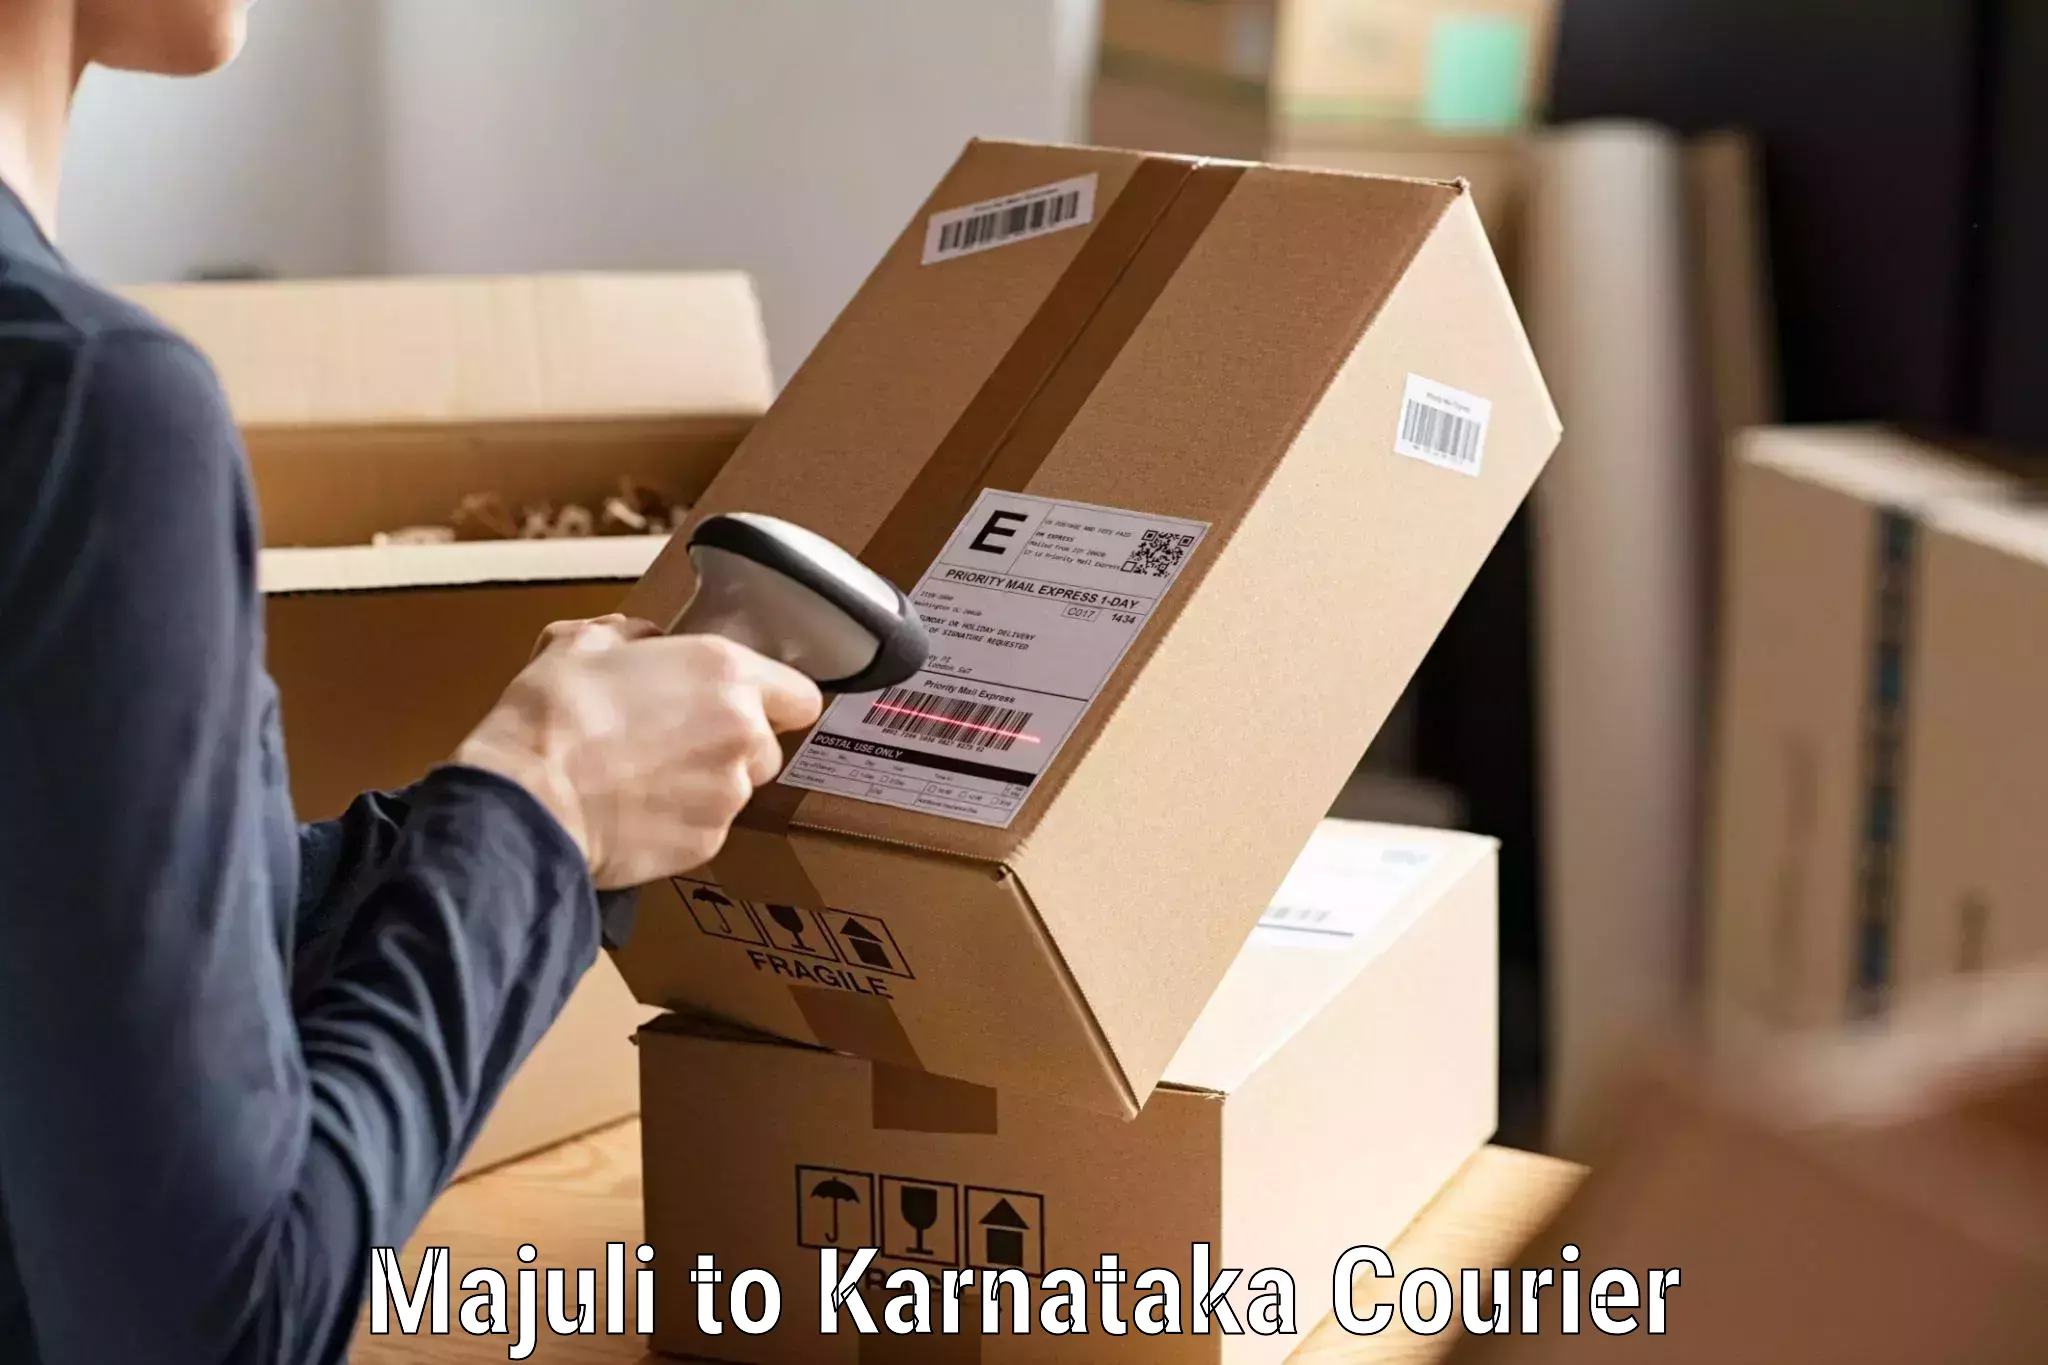 Business delivery service Majuli to Mangalore Port